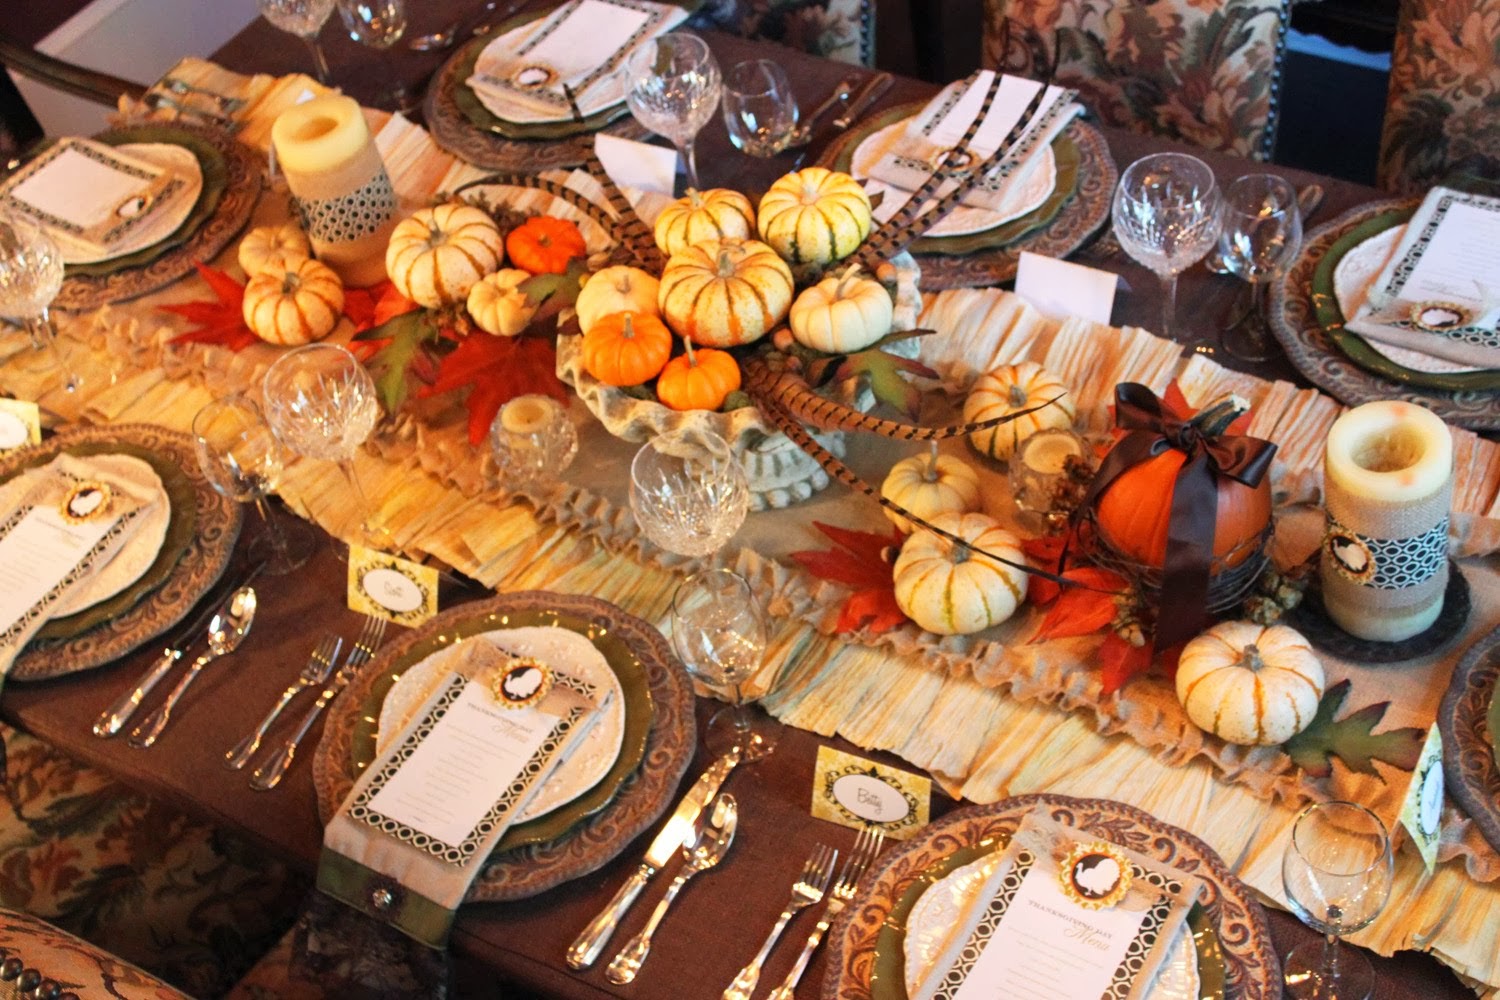 Some ideas for where to eat Thanksgiving dinner in Paris 2013